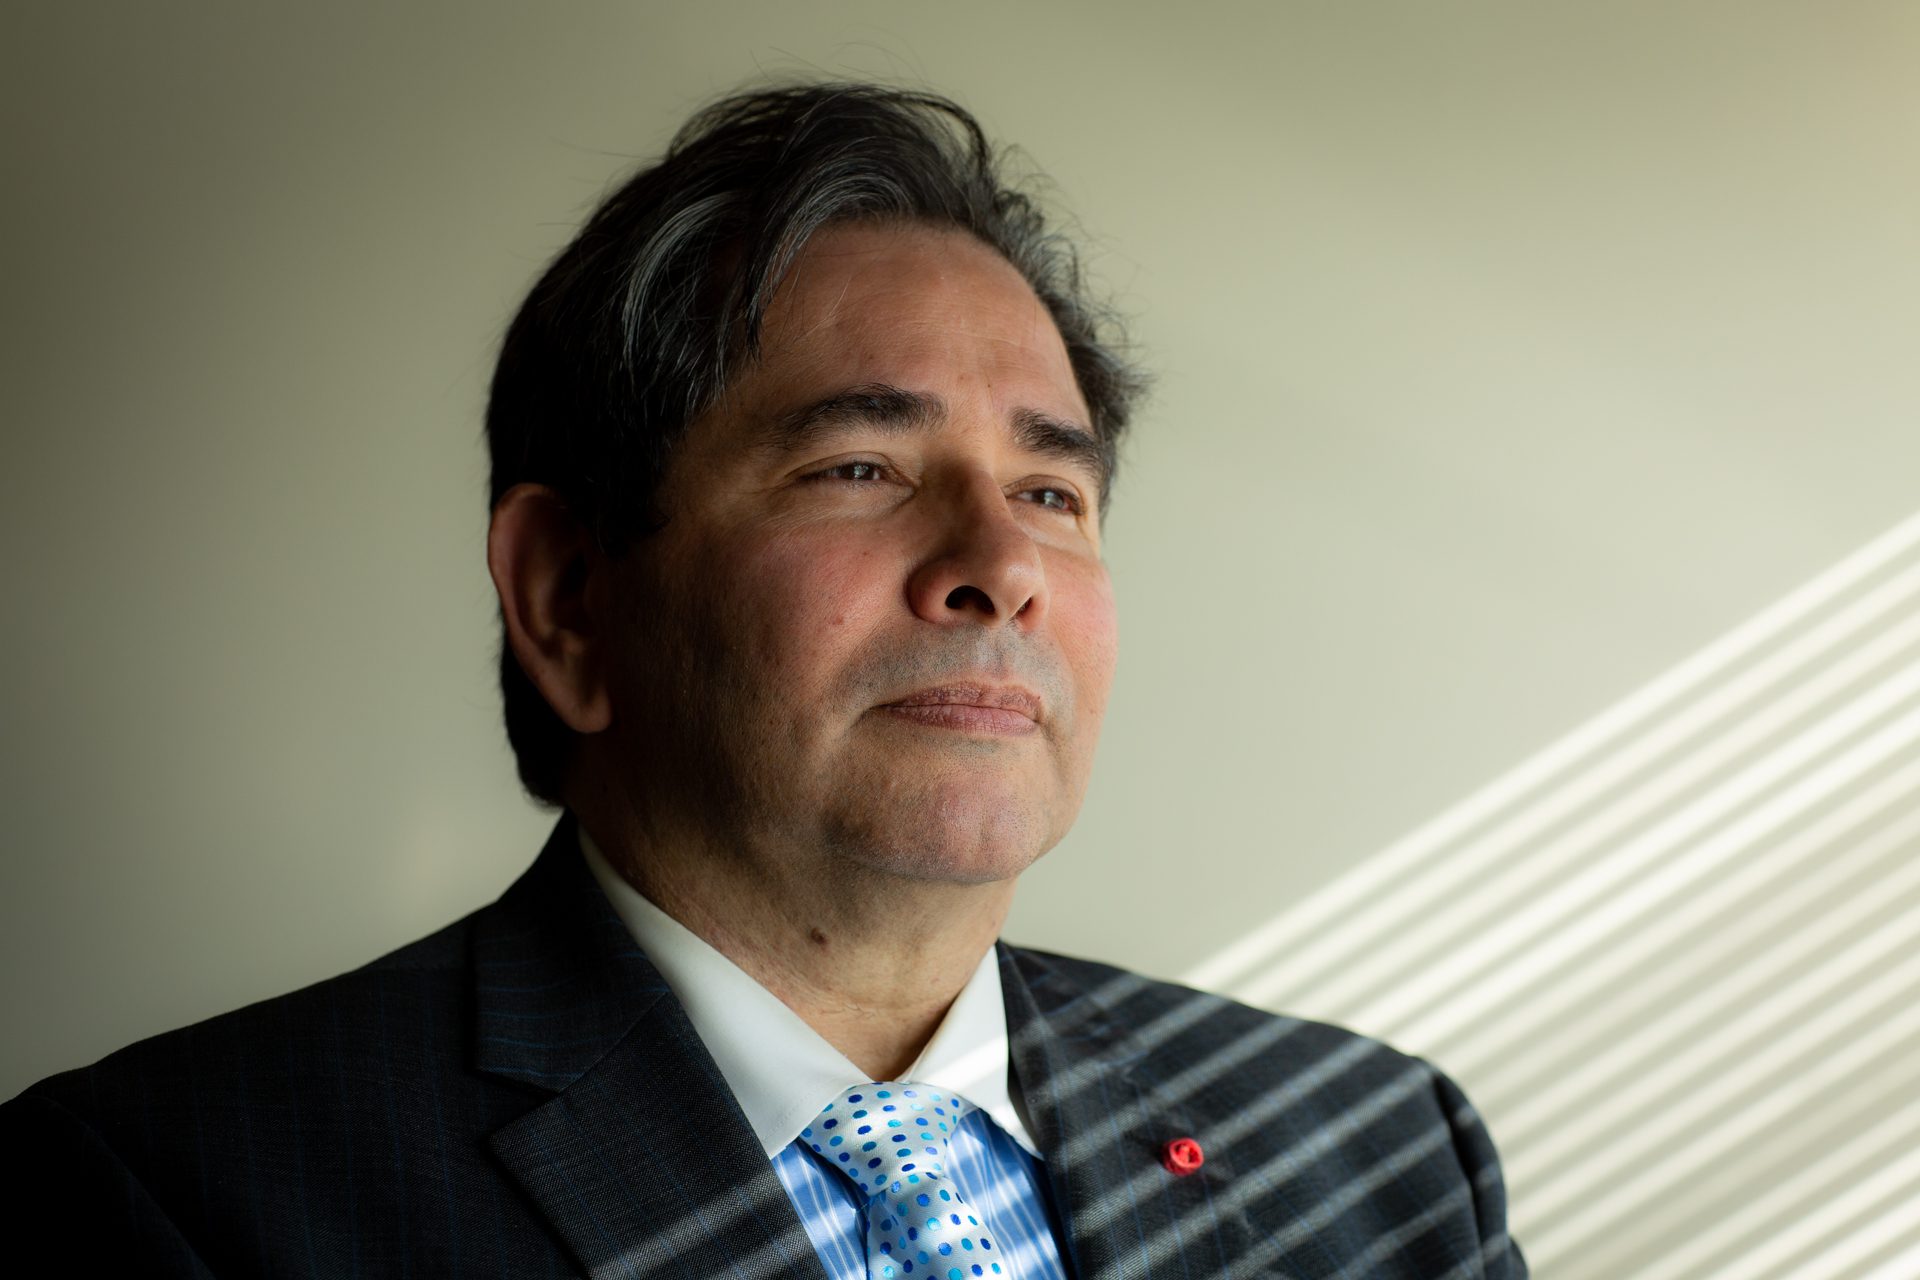 Frank Sandoval wearing a gray jacket and blue dot tie in front of a cream wall with rays of sunlight